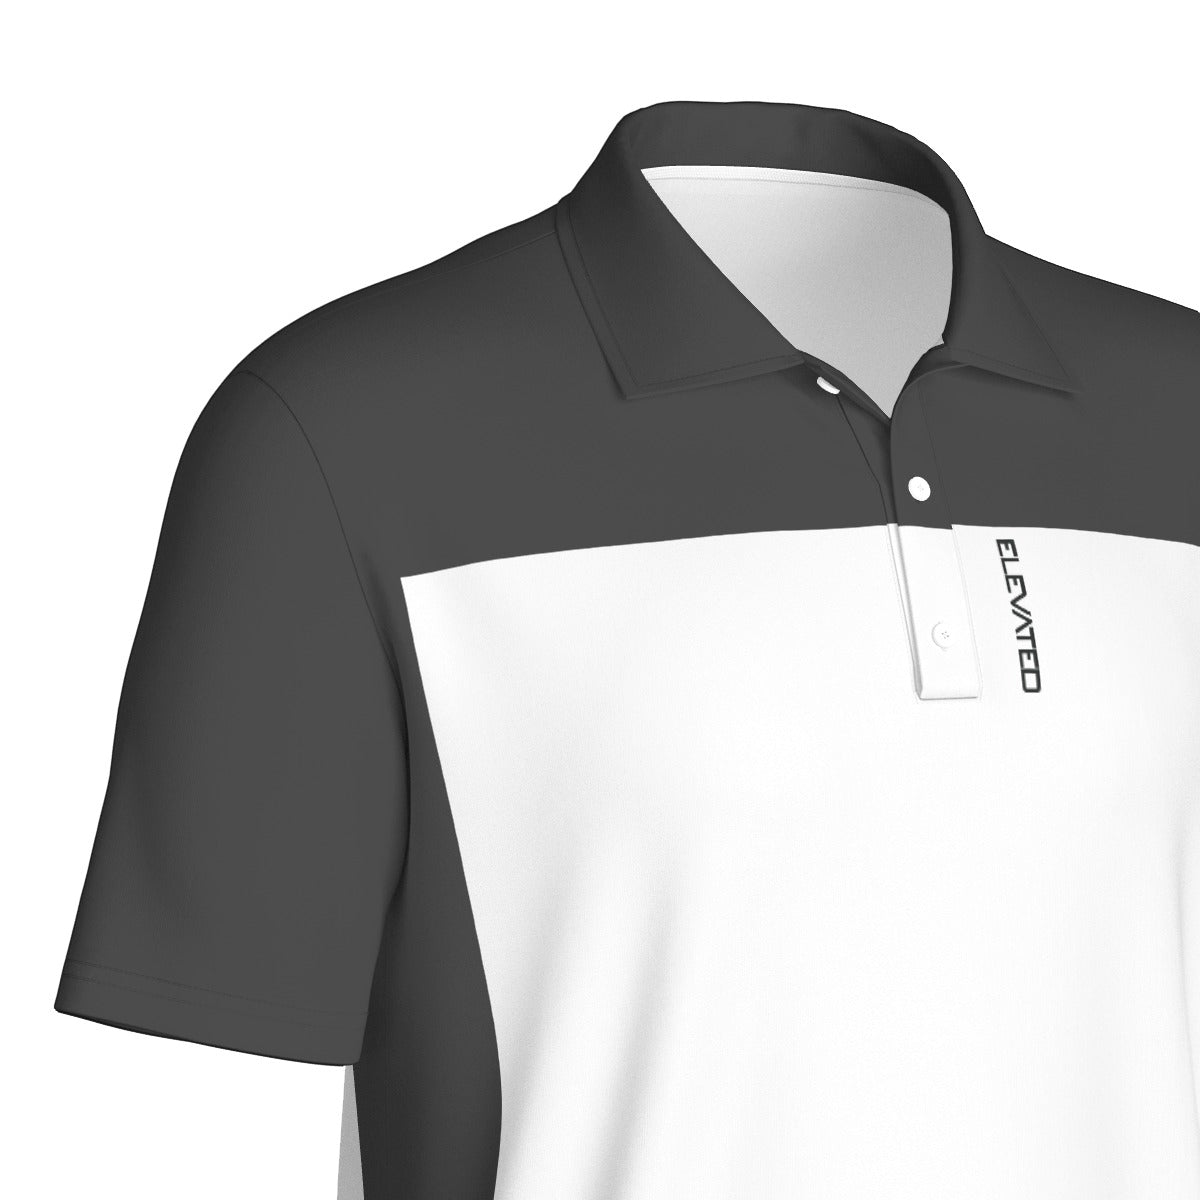 Elevated Black Strip breathable golf polo